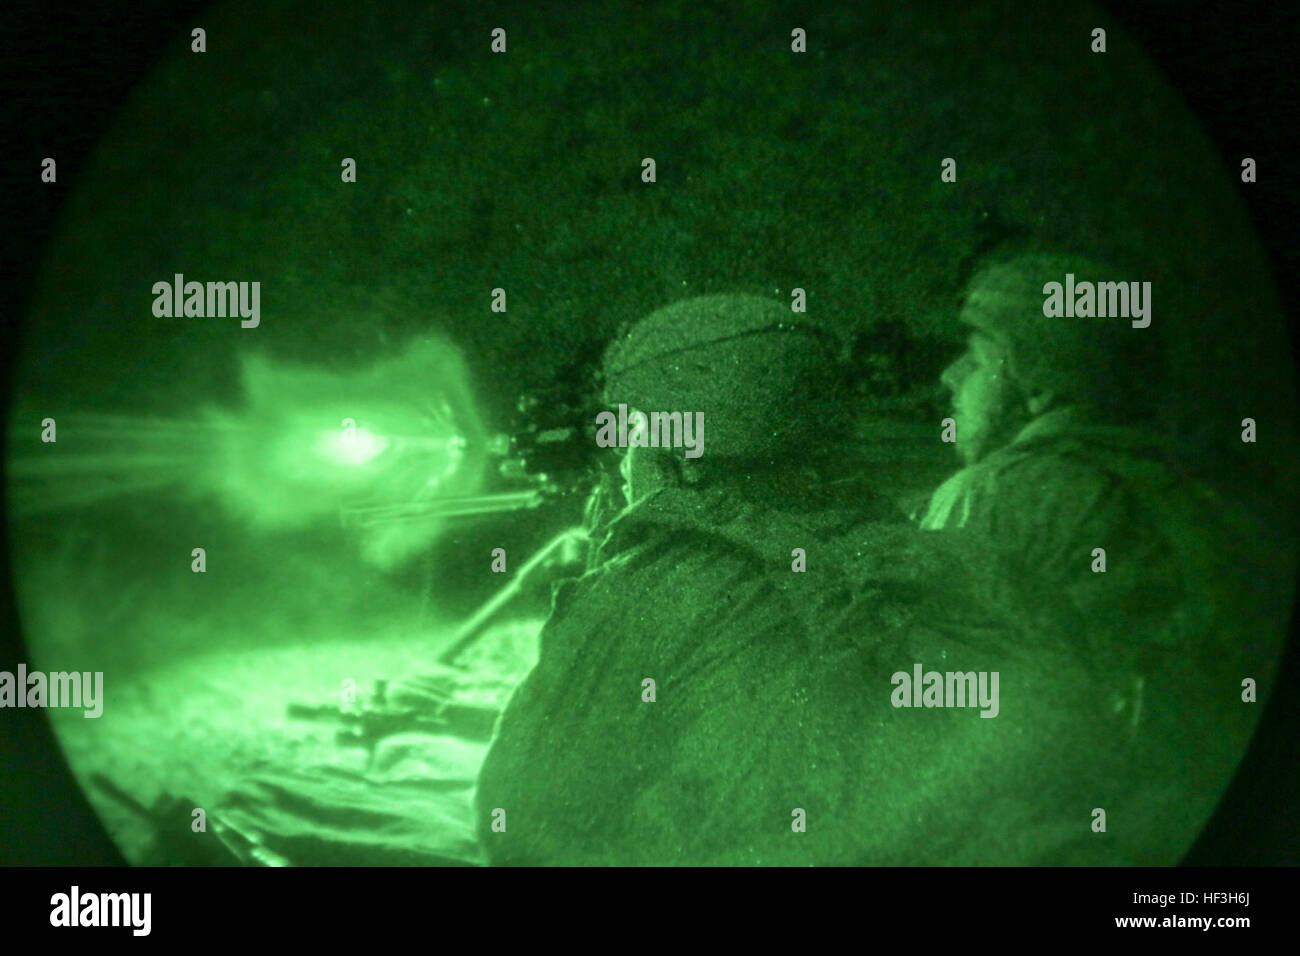 ARTA BEACH, Djibouti (July 22, 2015) U.S. Marines with Battalion Landing Team 3rd Battalion, 1st Marine Regiment, 15th Marine Expeditionary Unit, fire an M240B medium machine gun during a night-fire exercise.  The Marines of BLT 3/1 executed a series of attack and maneuver drills consisting of, machine gun, squad and night attacks.  Elements of the 15th Marine Expeditionary Unit are ashore in Djibouti for sustainment training to maintain and enhance the skills they developed during their pre-deployment training period.  The 15th MEU is currently deployed in support of maritime security operati Stock Photo